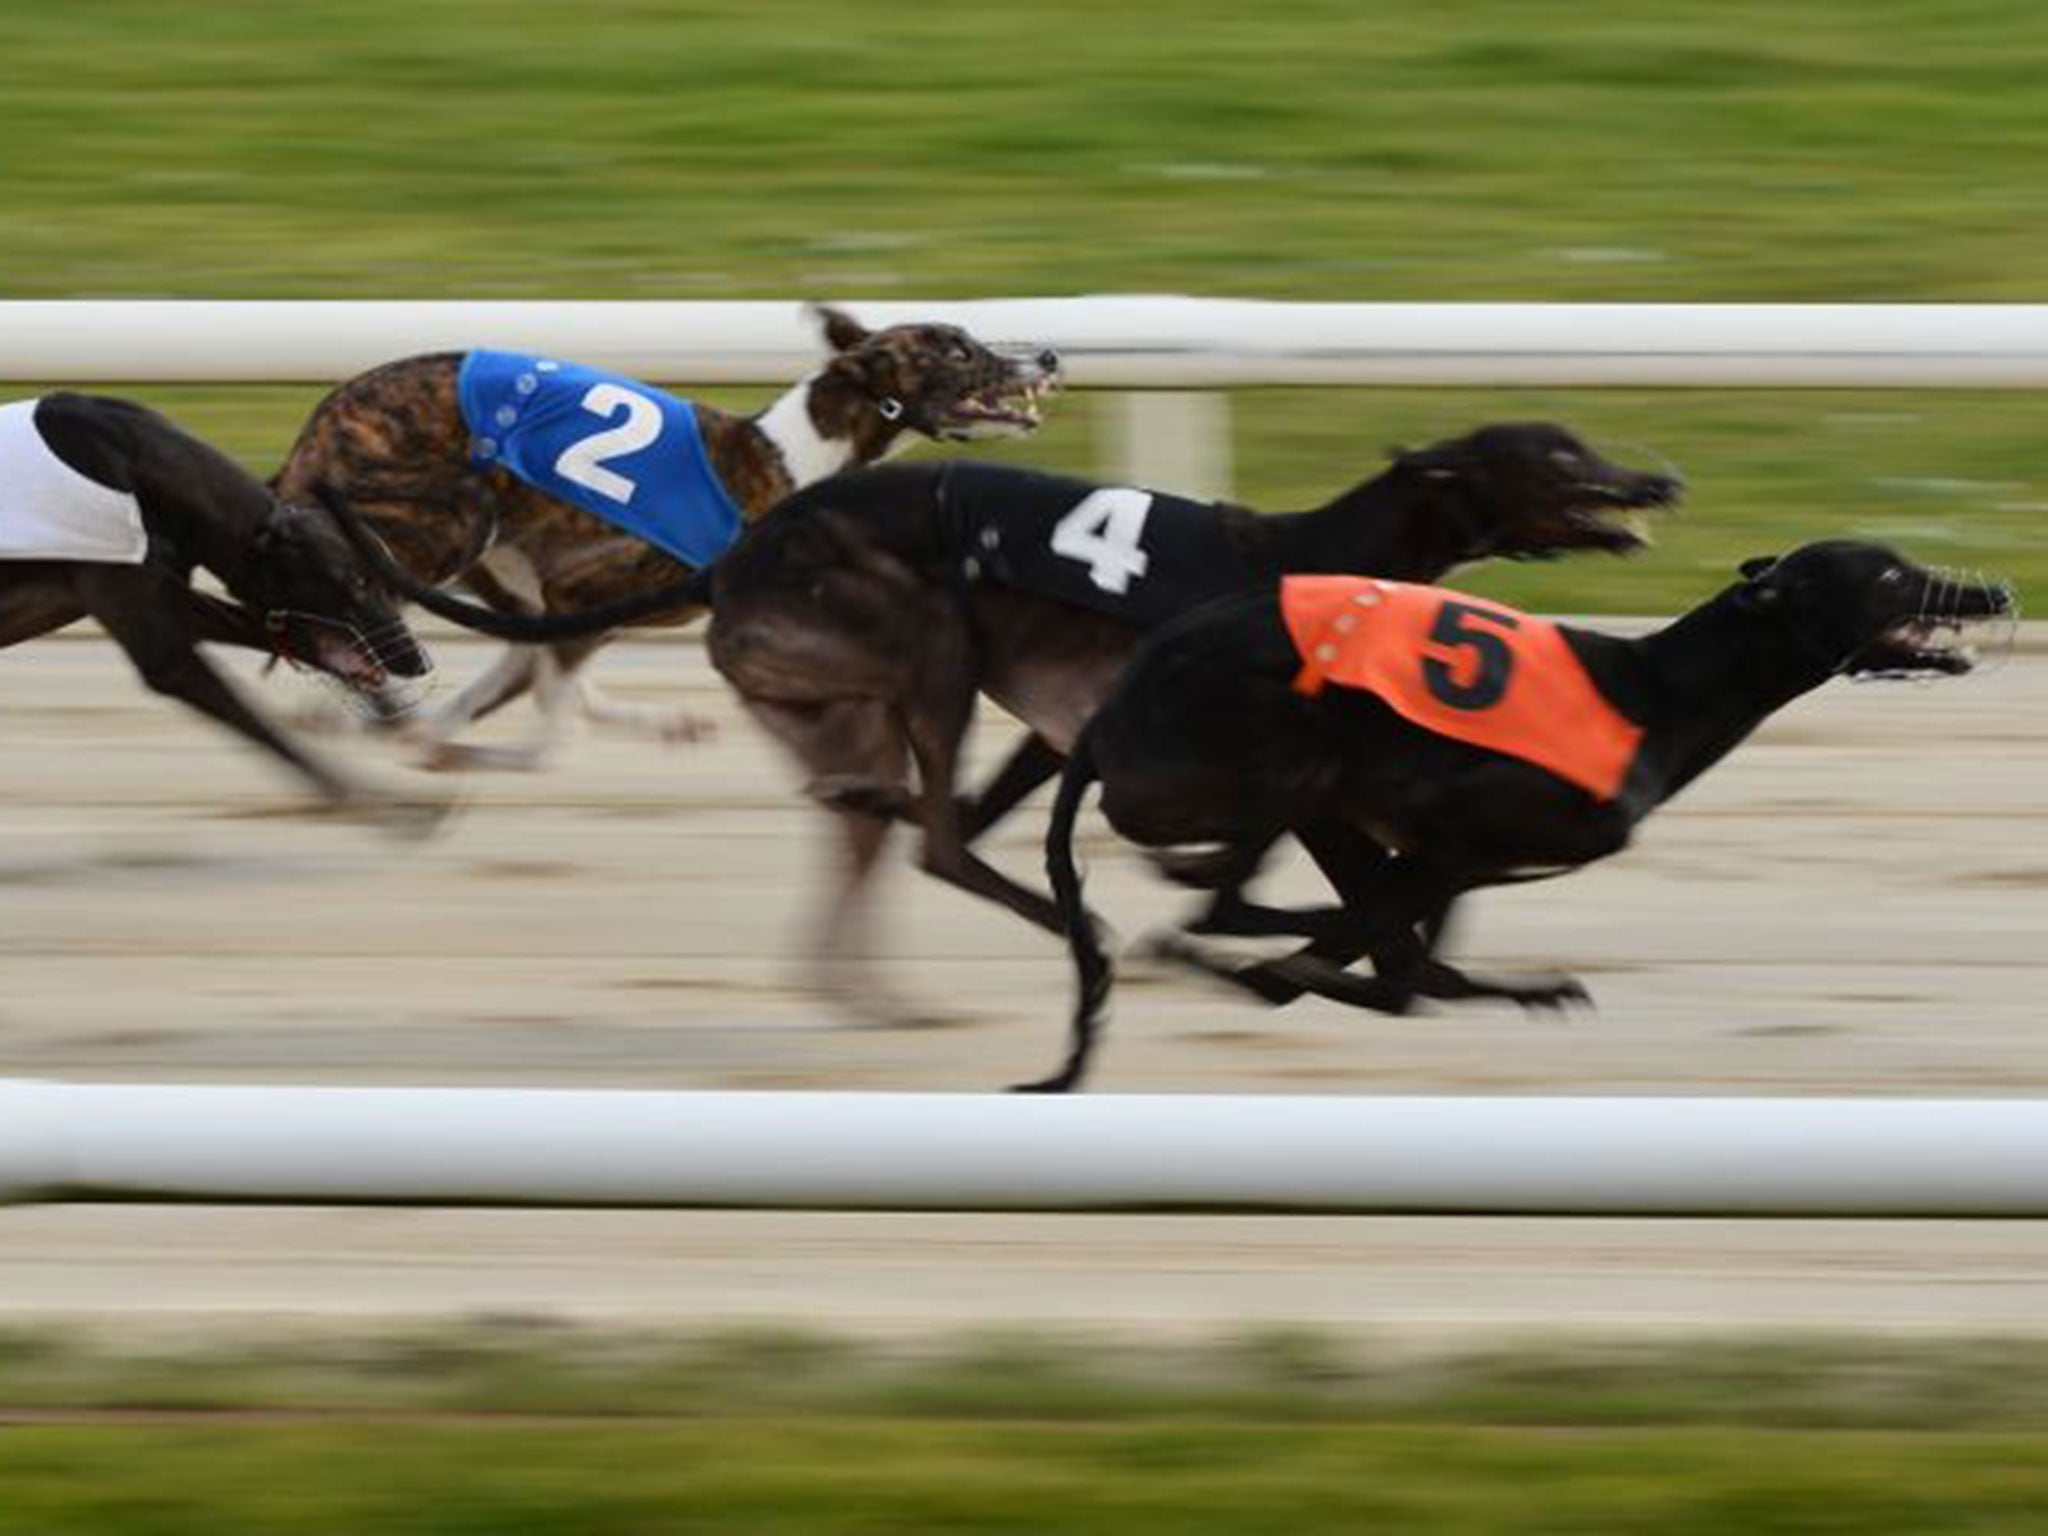 More than 7,000 greyhounds were registered to race last year